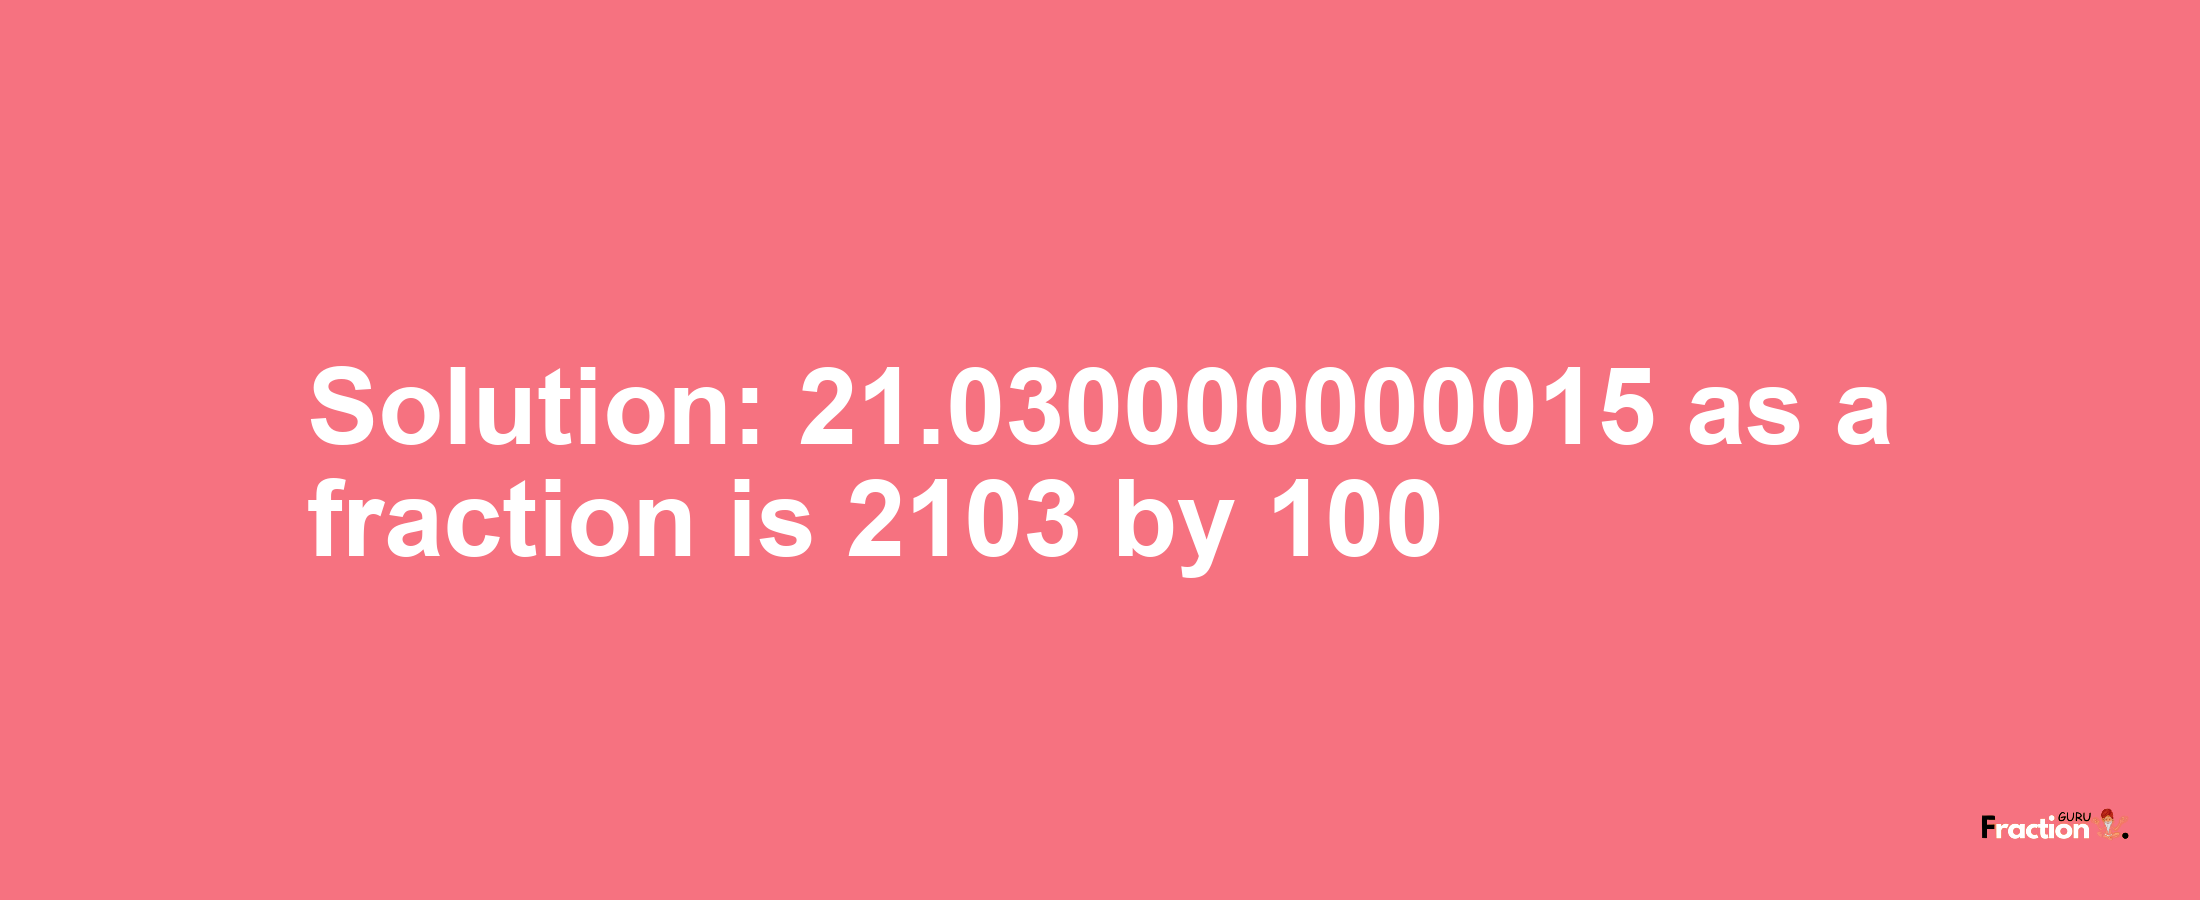 Solution:21.030000000015 as a fraction is 2103/100